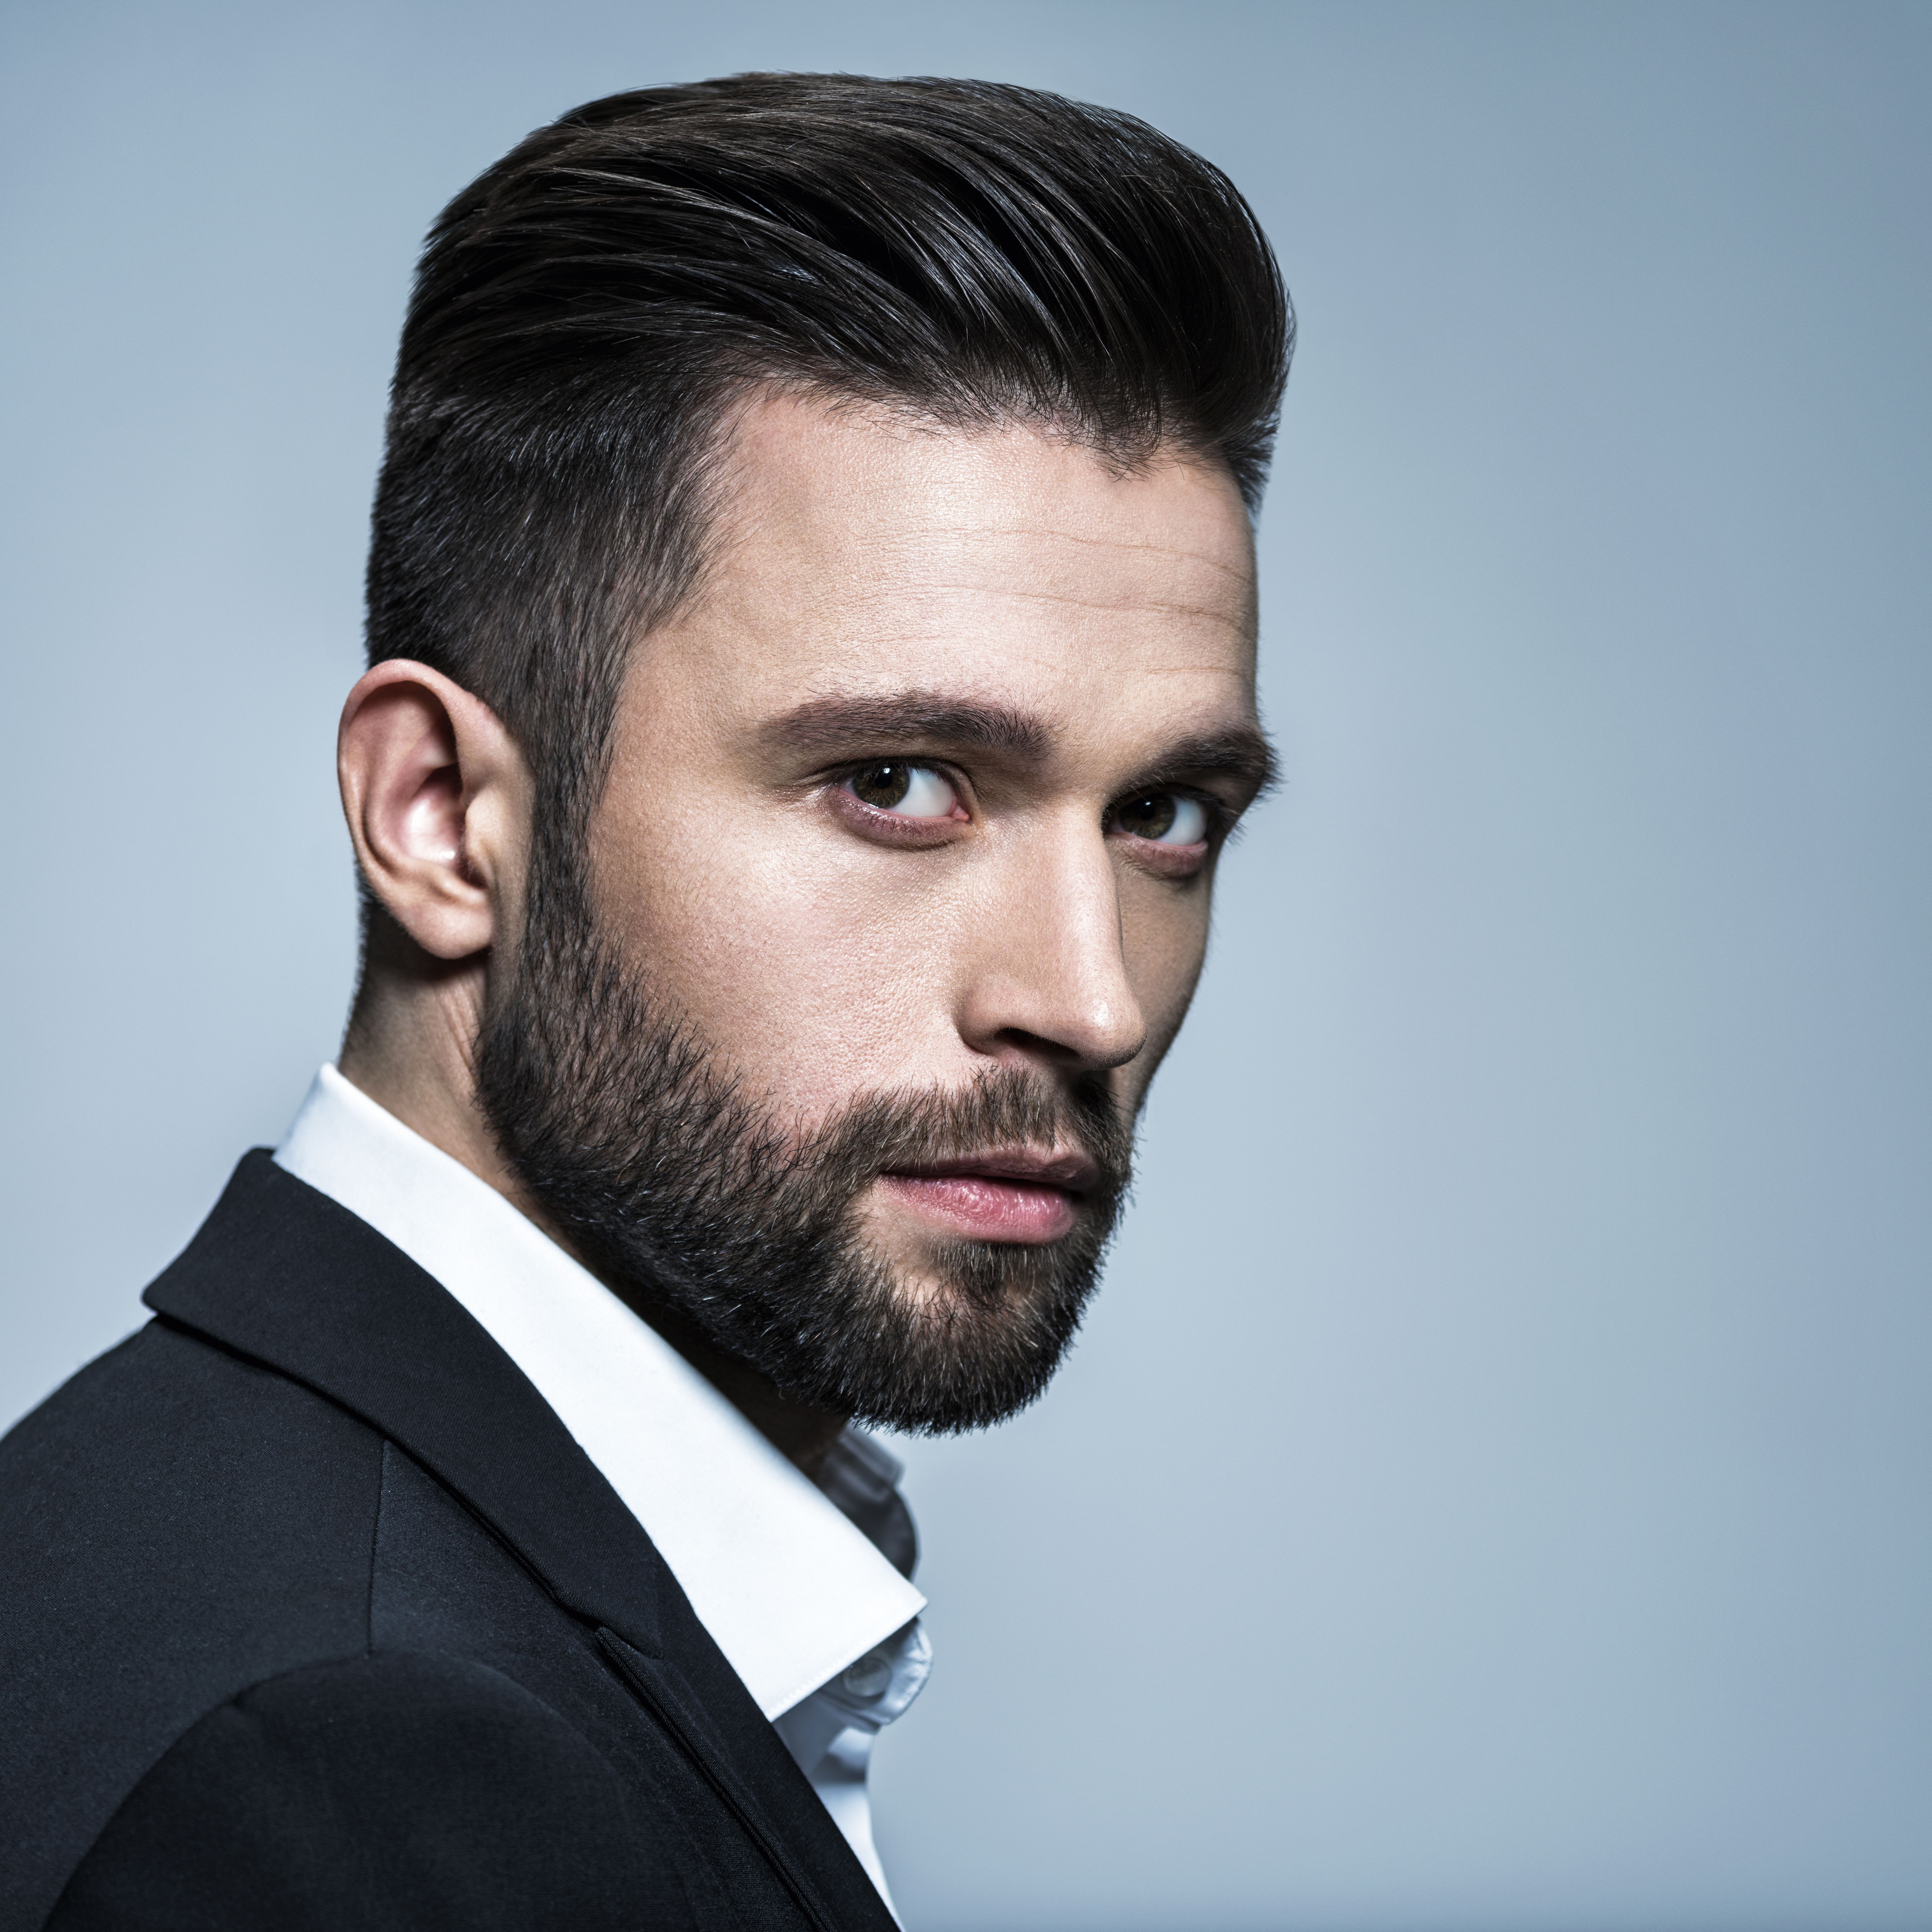 Discover 153+ oval face beard and hairstyle